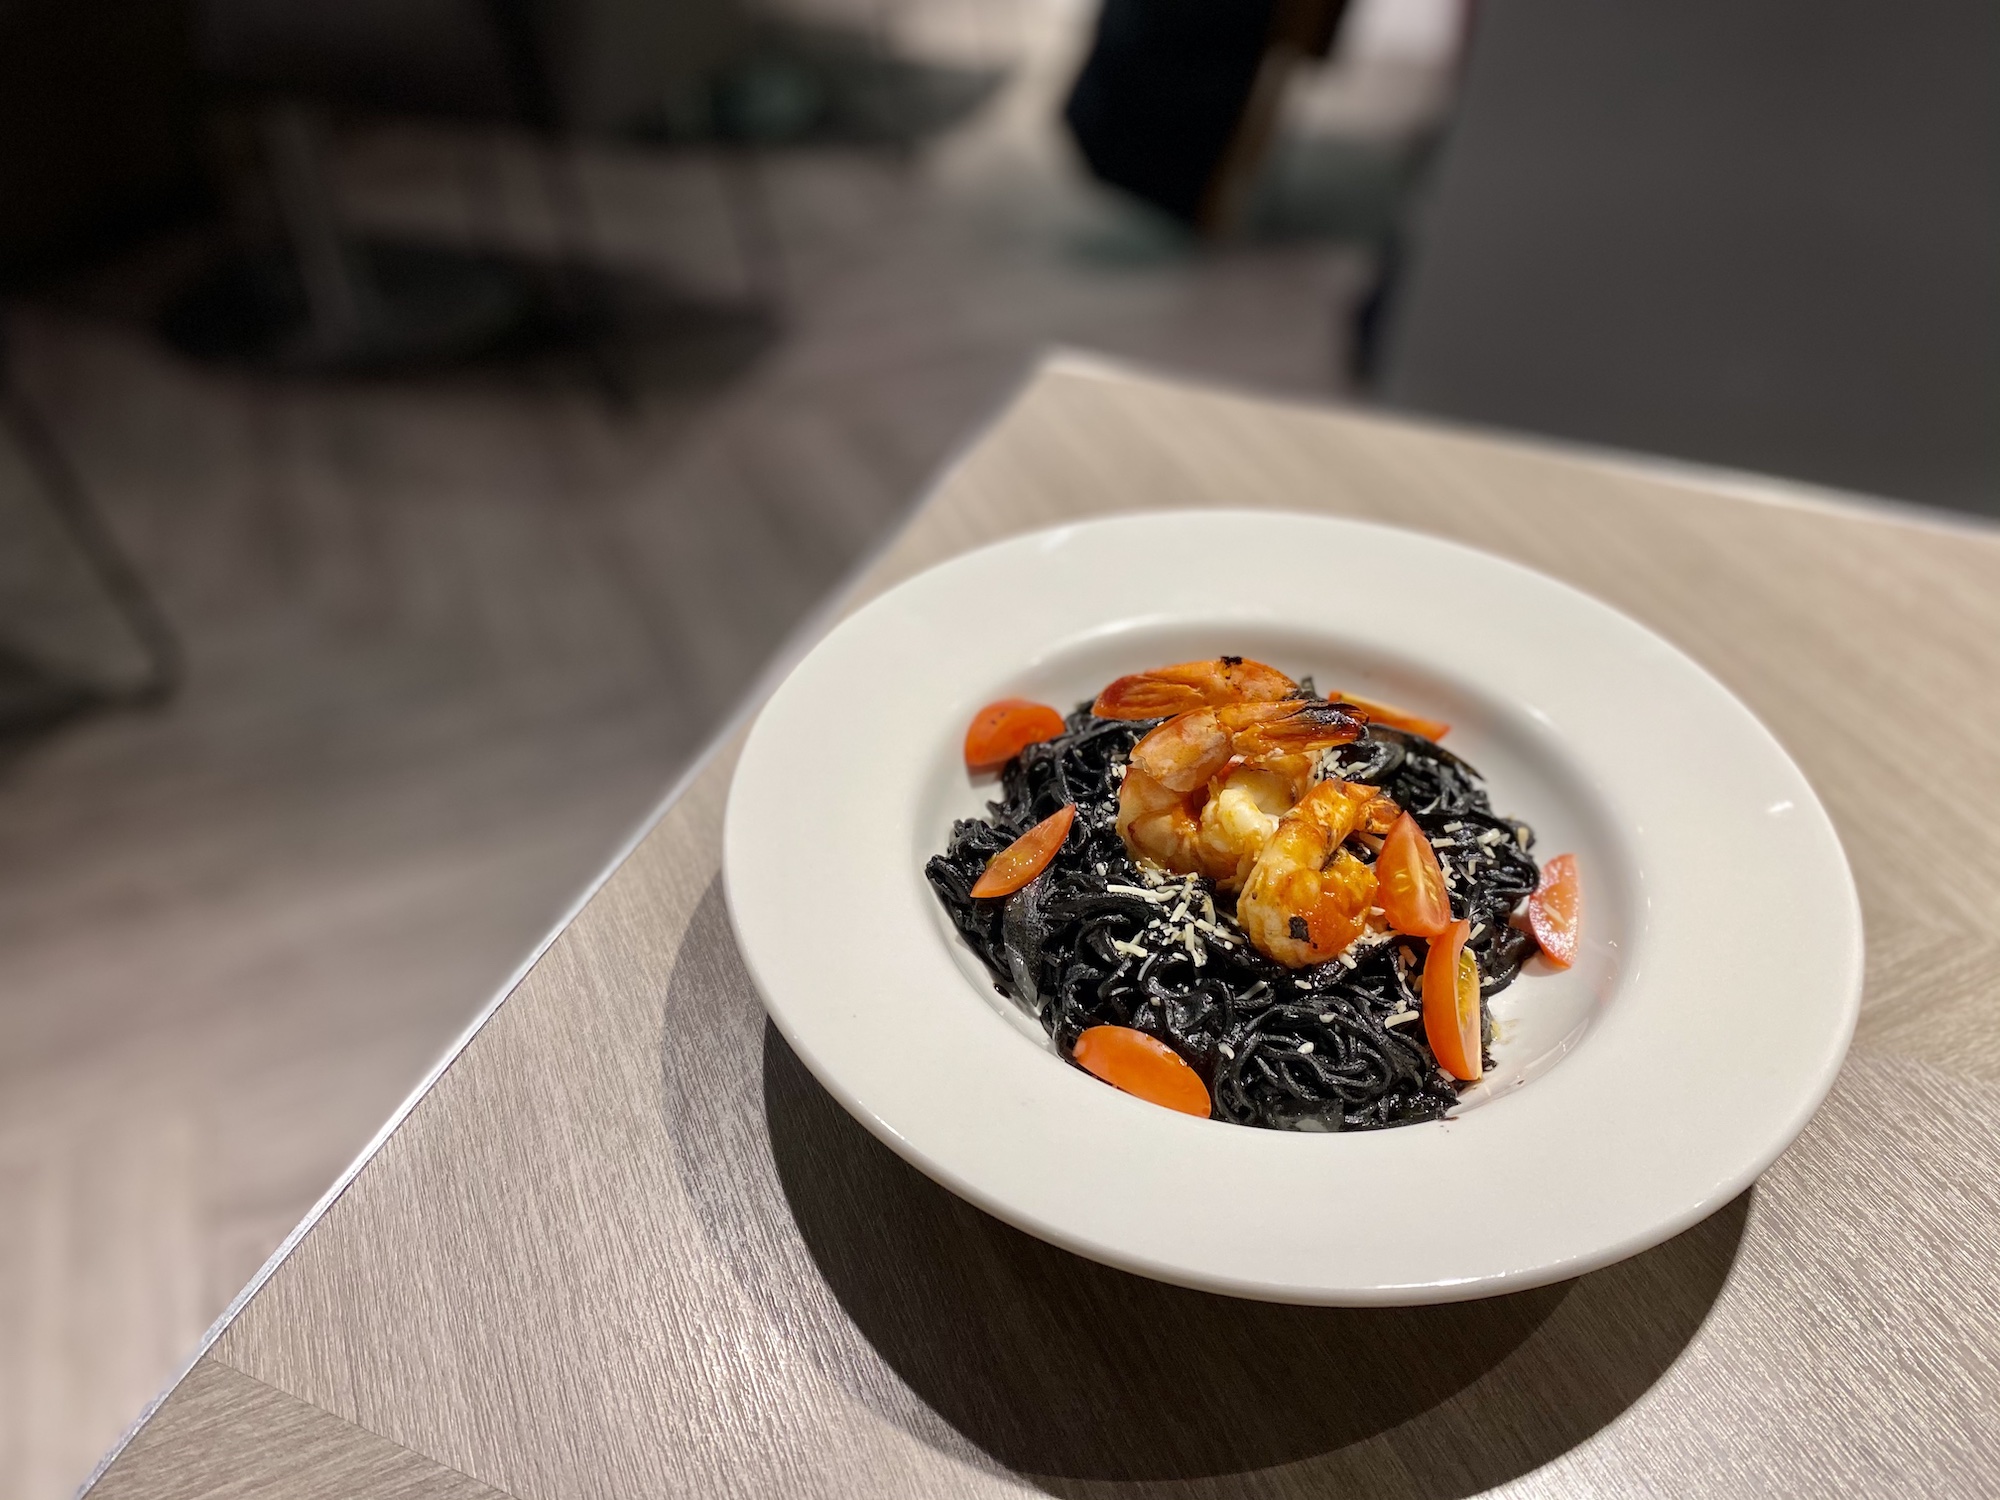 jam and butter one oasis squid ink pasta